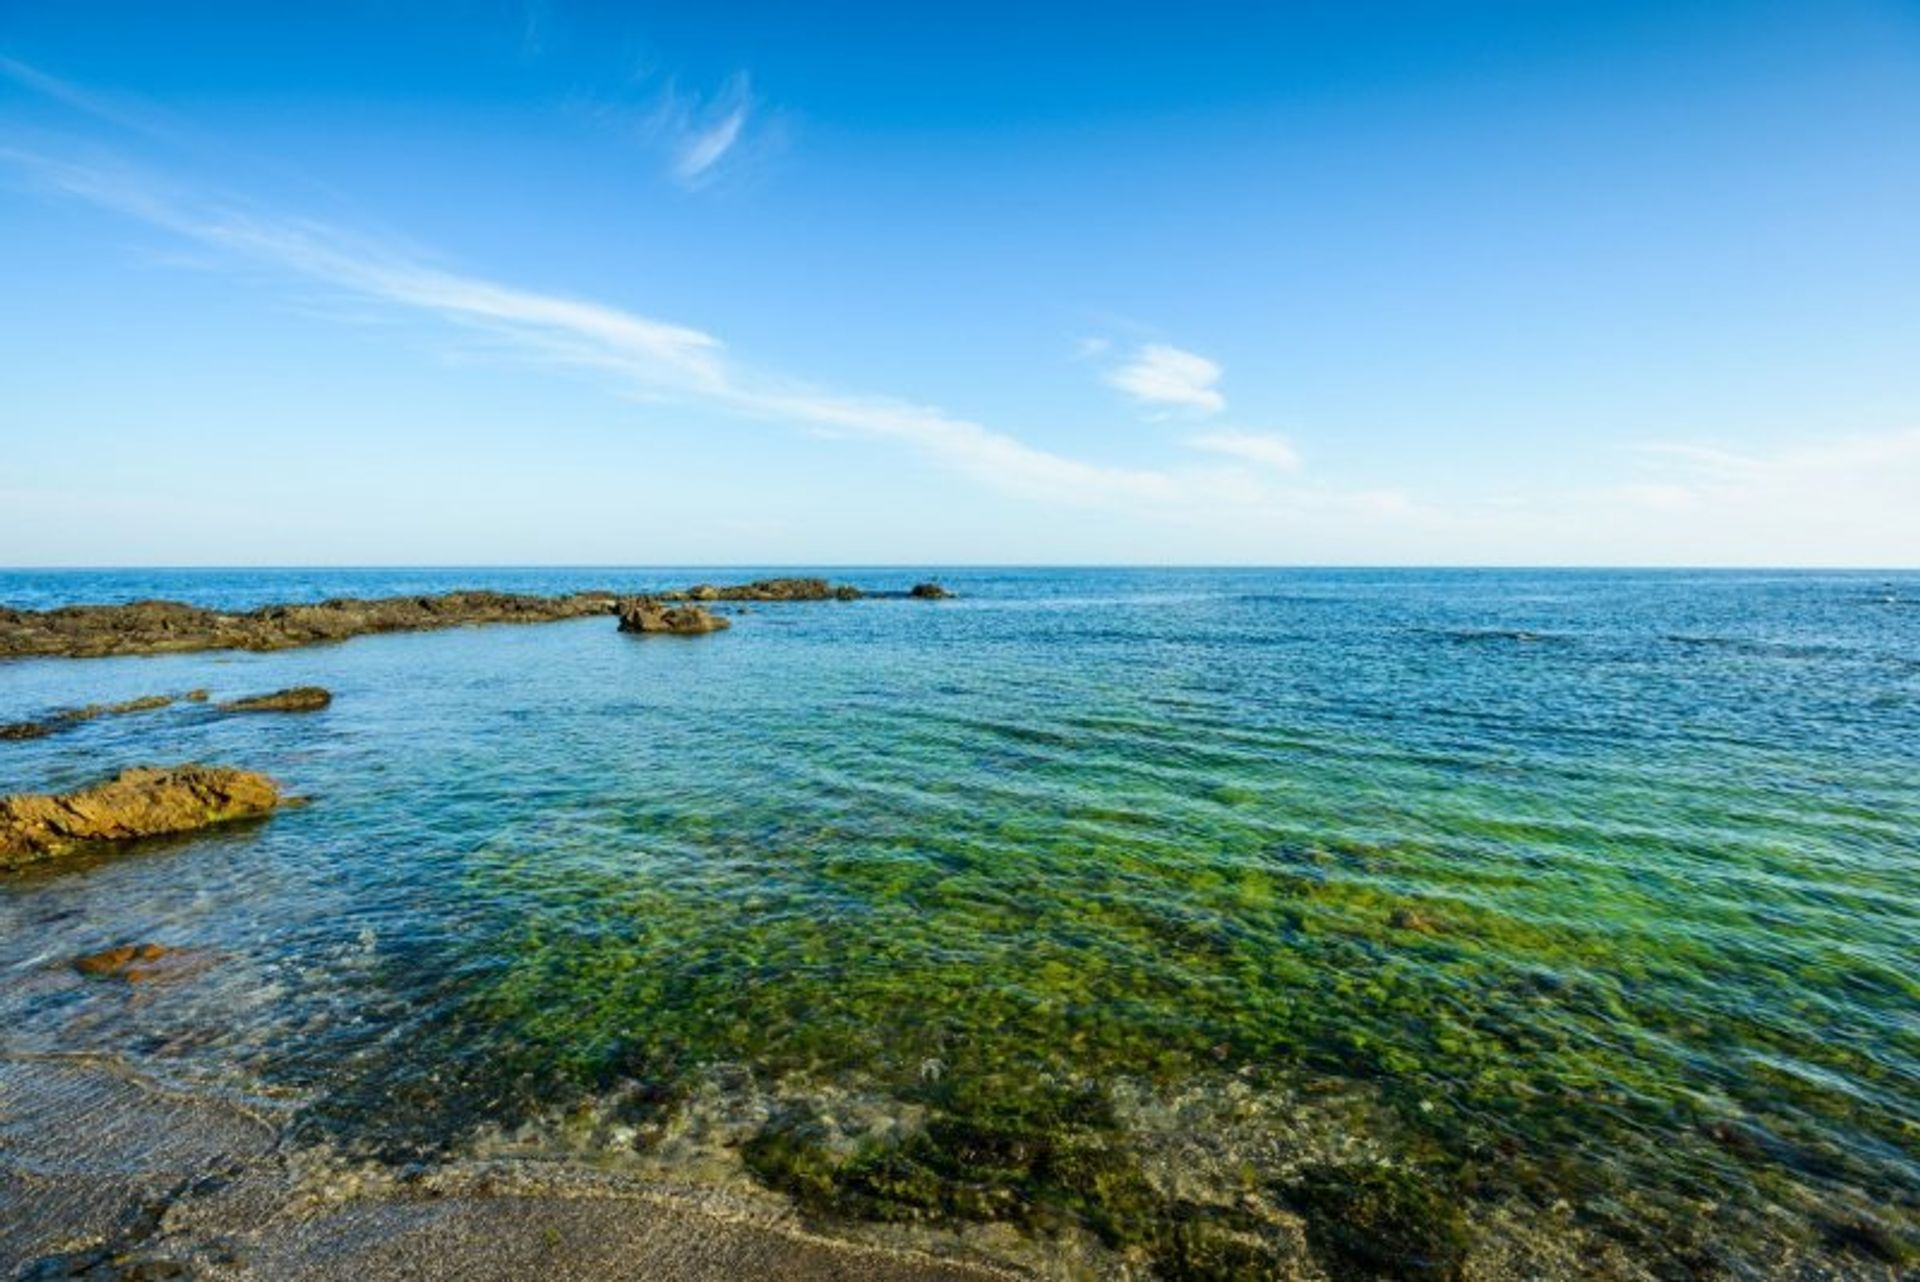  After a morning of sport, unwind by the coast on Calahonda beach